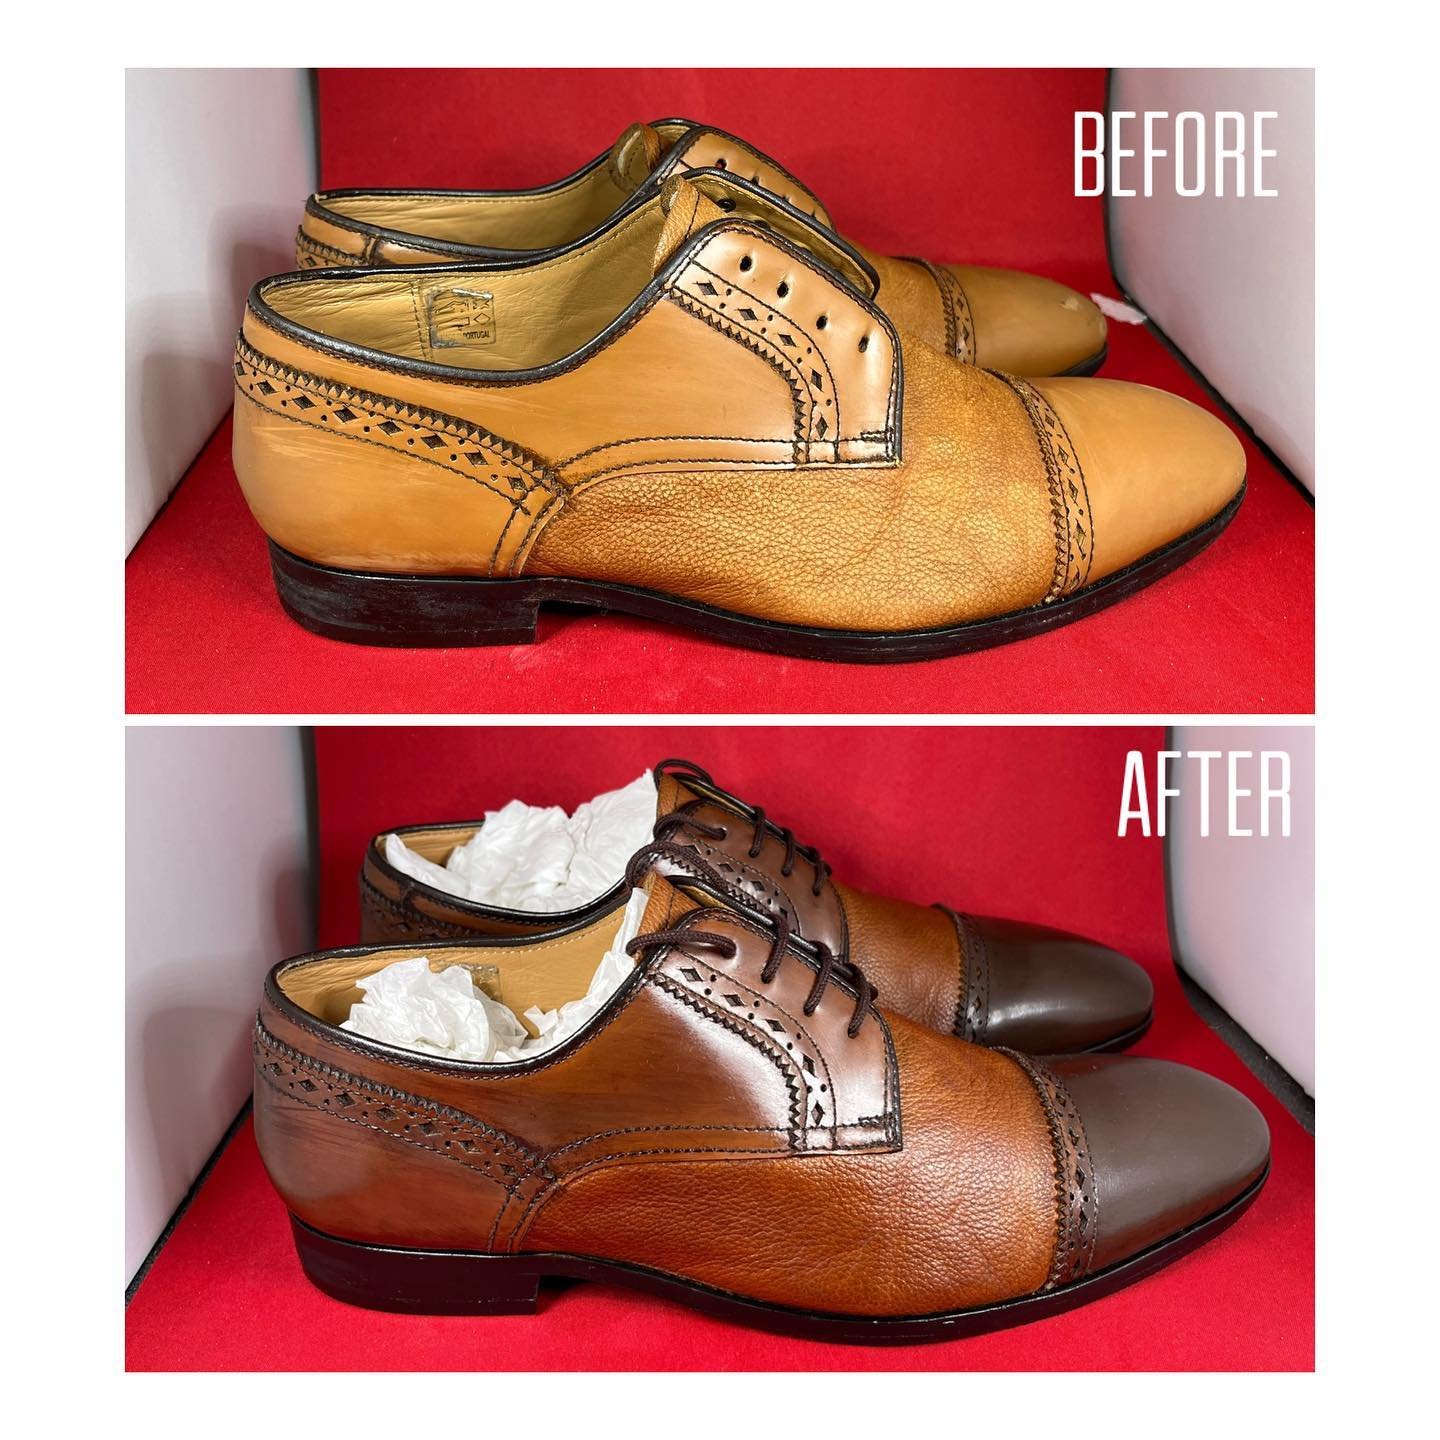 Same shoes. Different look!! The toe box has a few little chunks gone out of them so we&rsquo;ve opted to fill them and paint the toe. Have used dyes and waxes everywhere else. We think they look dapper!!! Don&rsquo;t bin your favourite kicks. Let us